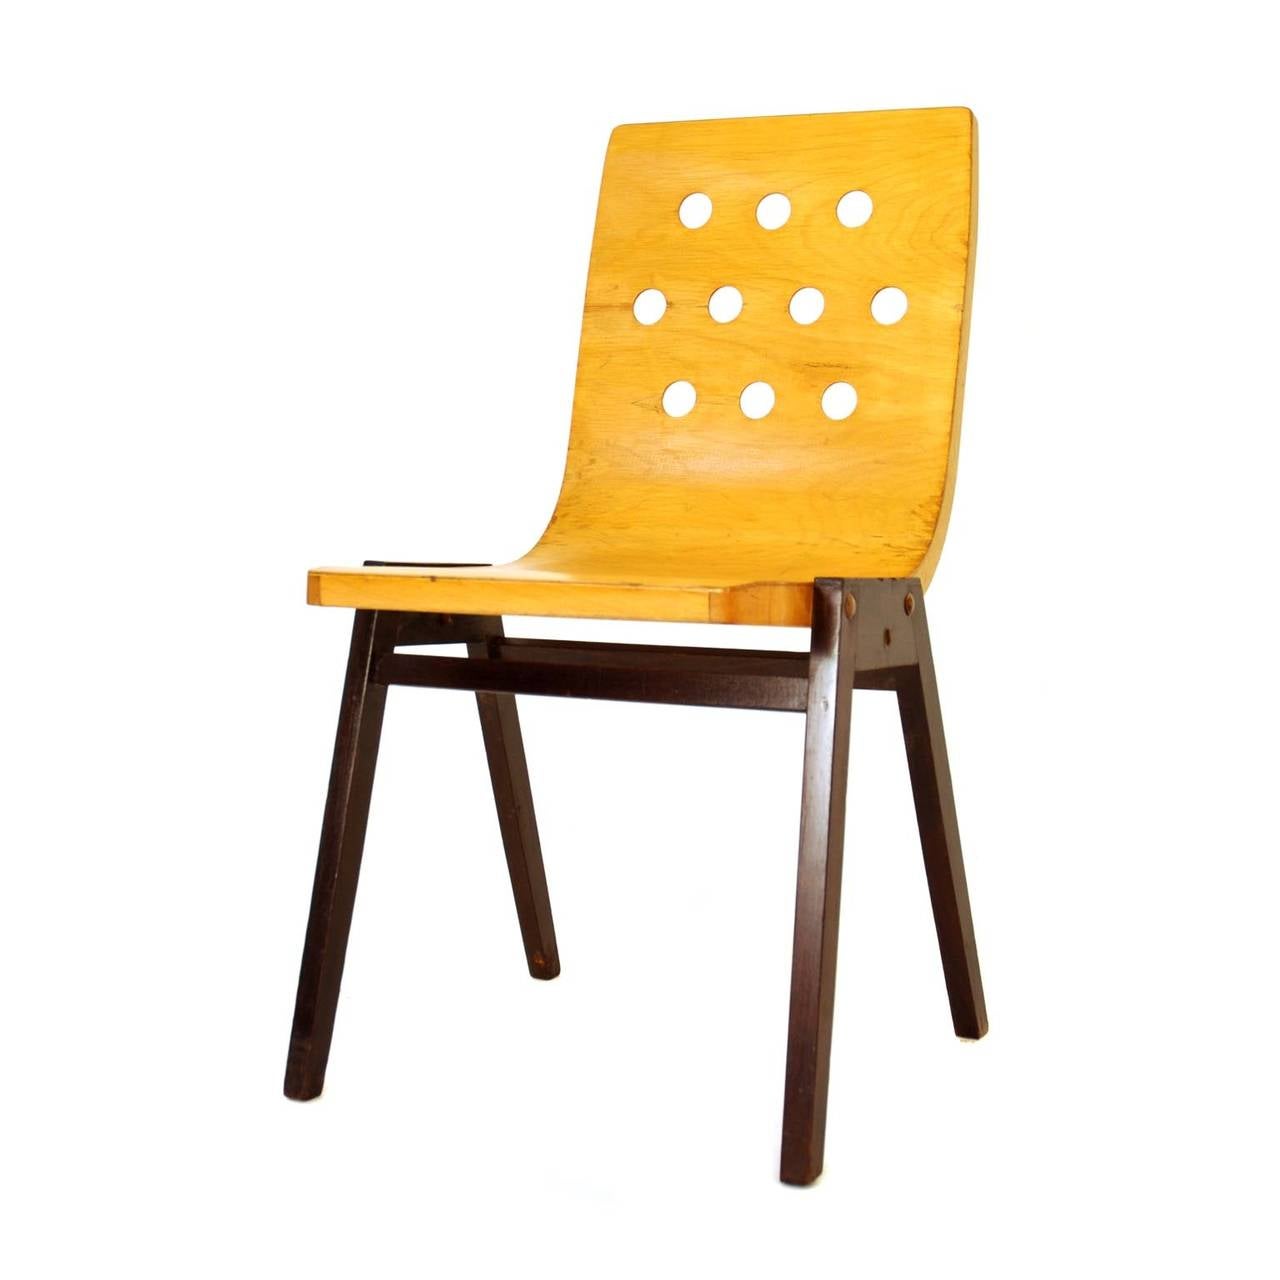 This chair was designed by Roland Rainer in 1951 for the Viennese City Hall.
Manufactured by Emil and Alfred Pollak.
This model differs from the typical ones by the colours - usually the back and the seat are dark stained, and the legs are bright.